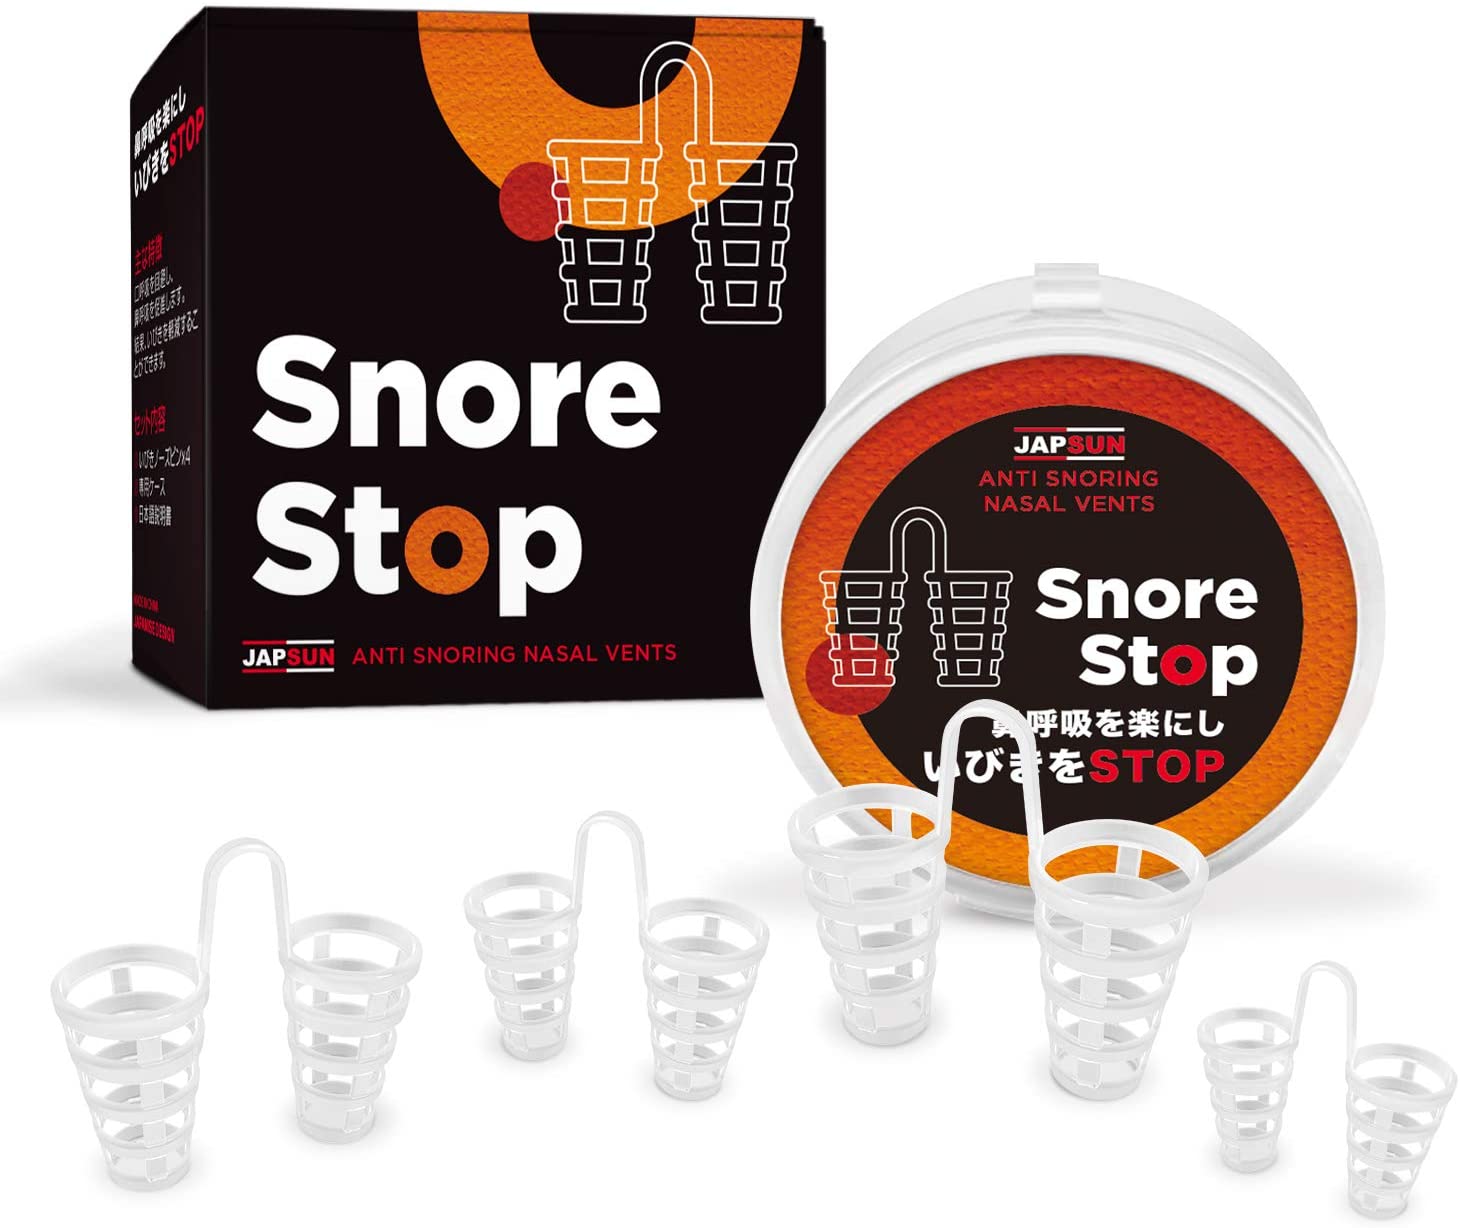 JAPSUN Snore Stop Nose Vents, 4-Pack